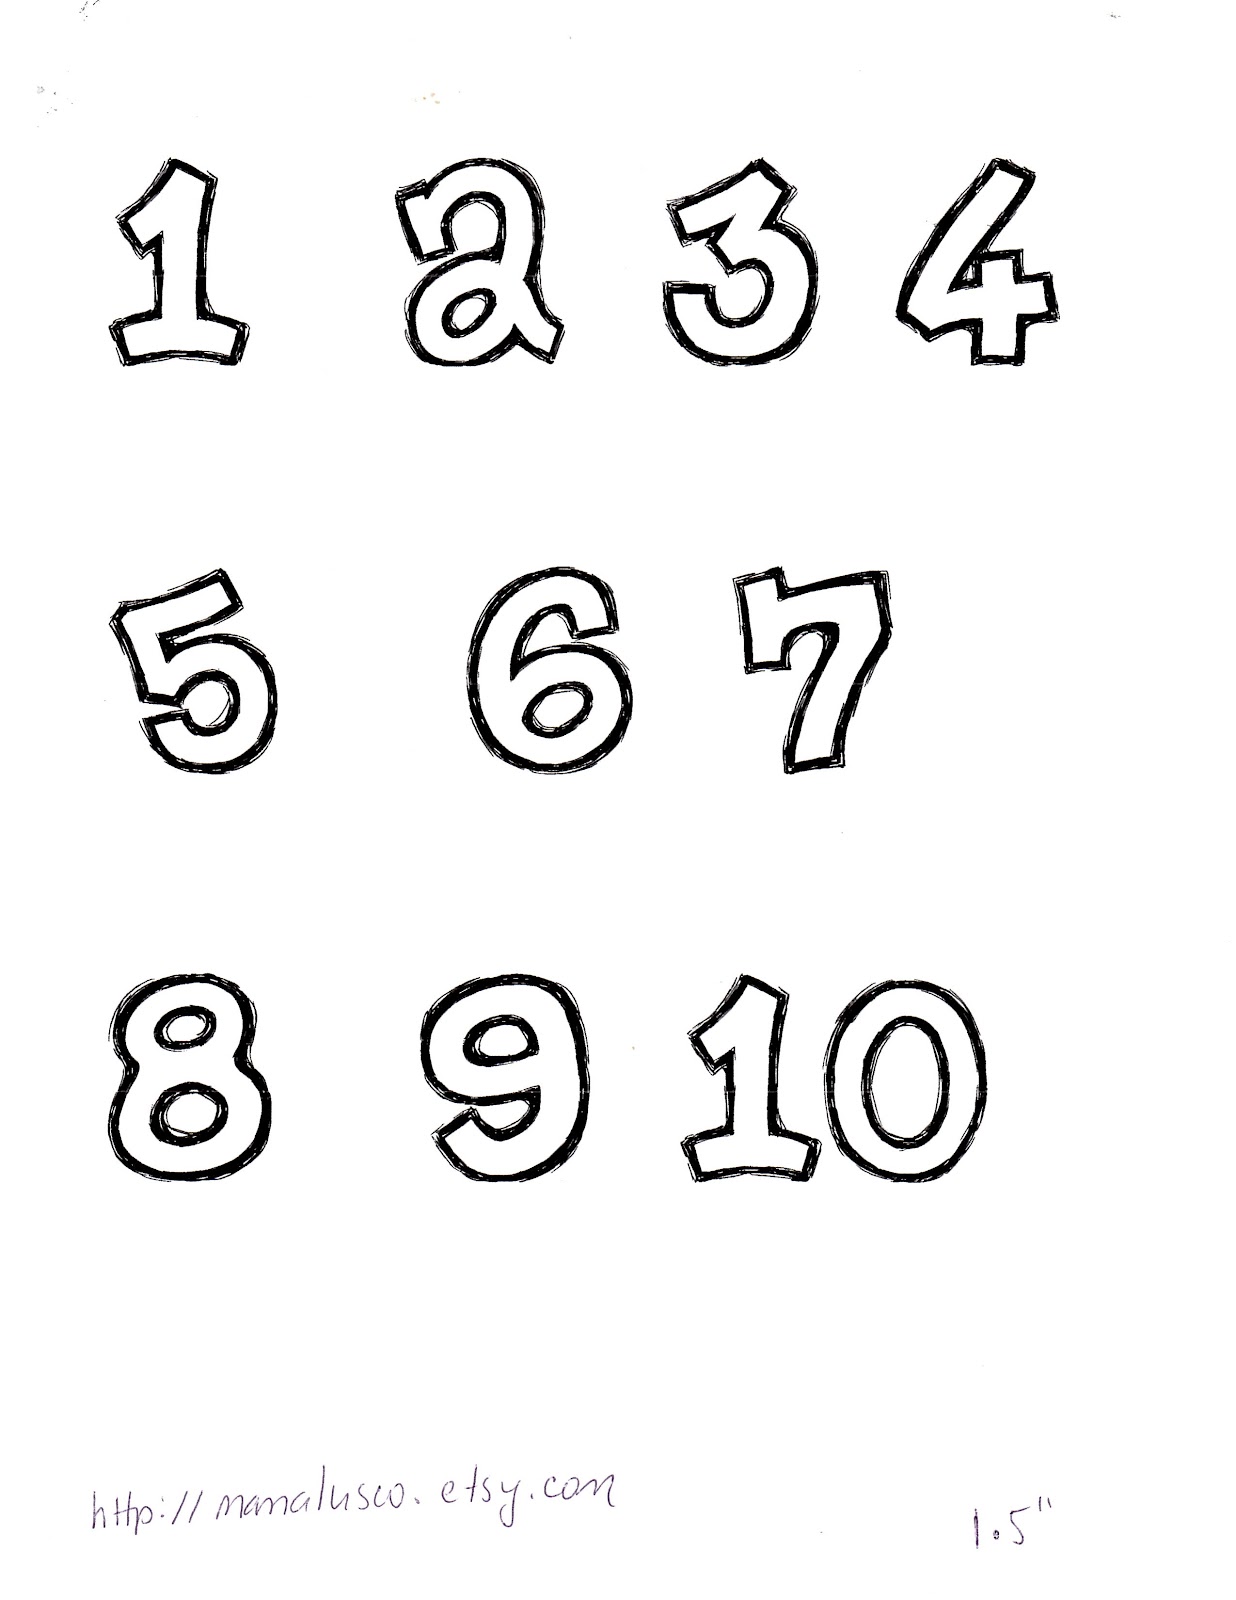 7-best-images-of-free-printable-number-templates-number-3-stencils